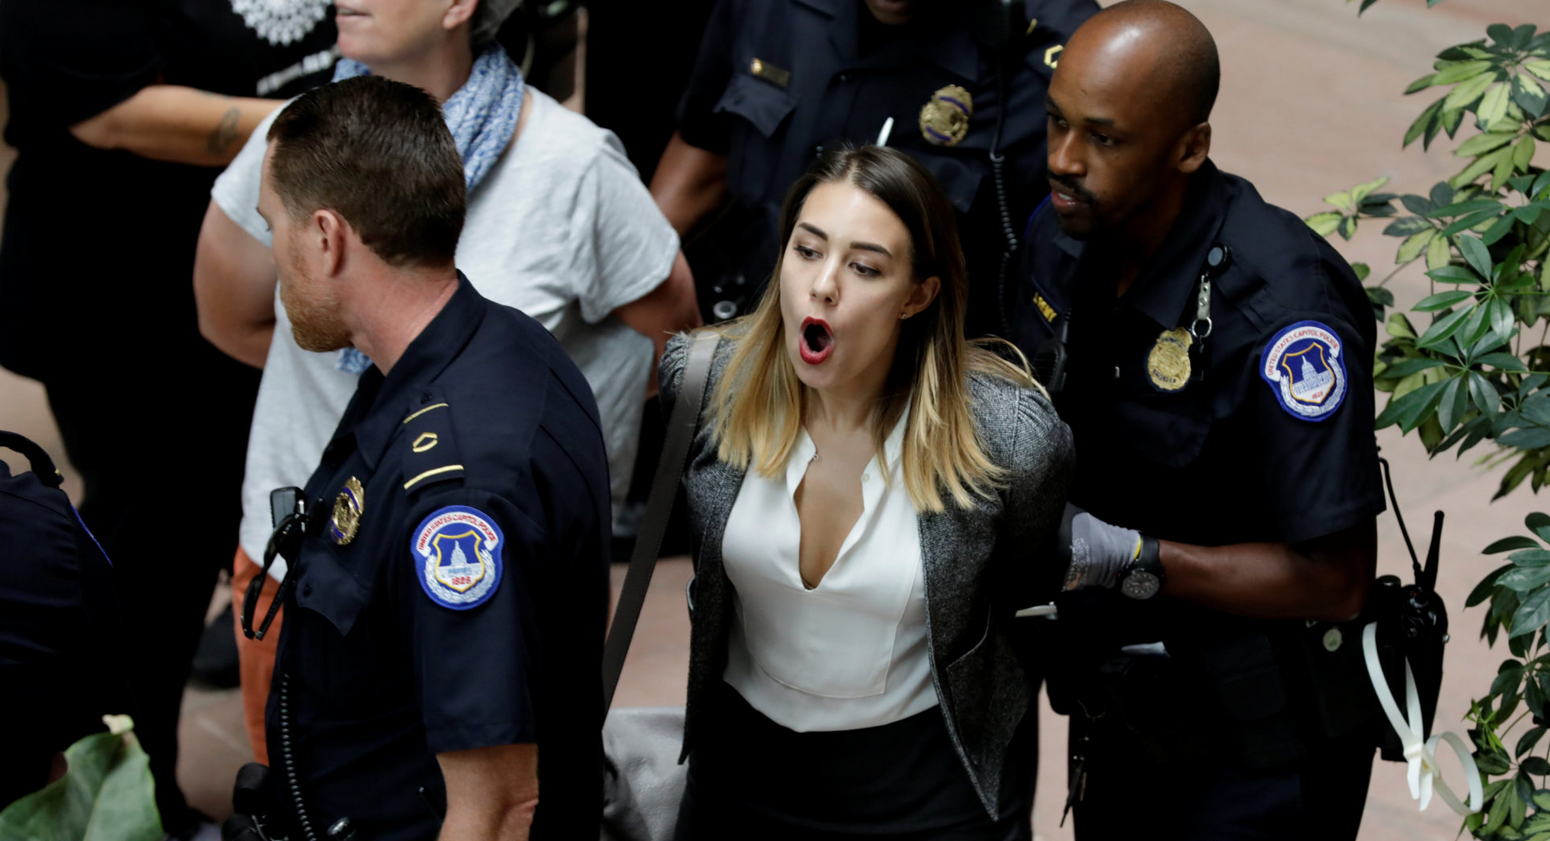 A protester is arrested during a demonstration in opposition to U.S. President Donald Trump’s Supreme Court nominee Brett Kavanaugh on Capitol Hill in Washington, U.S., September 20, 2018. 